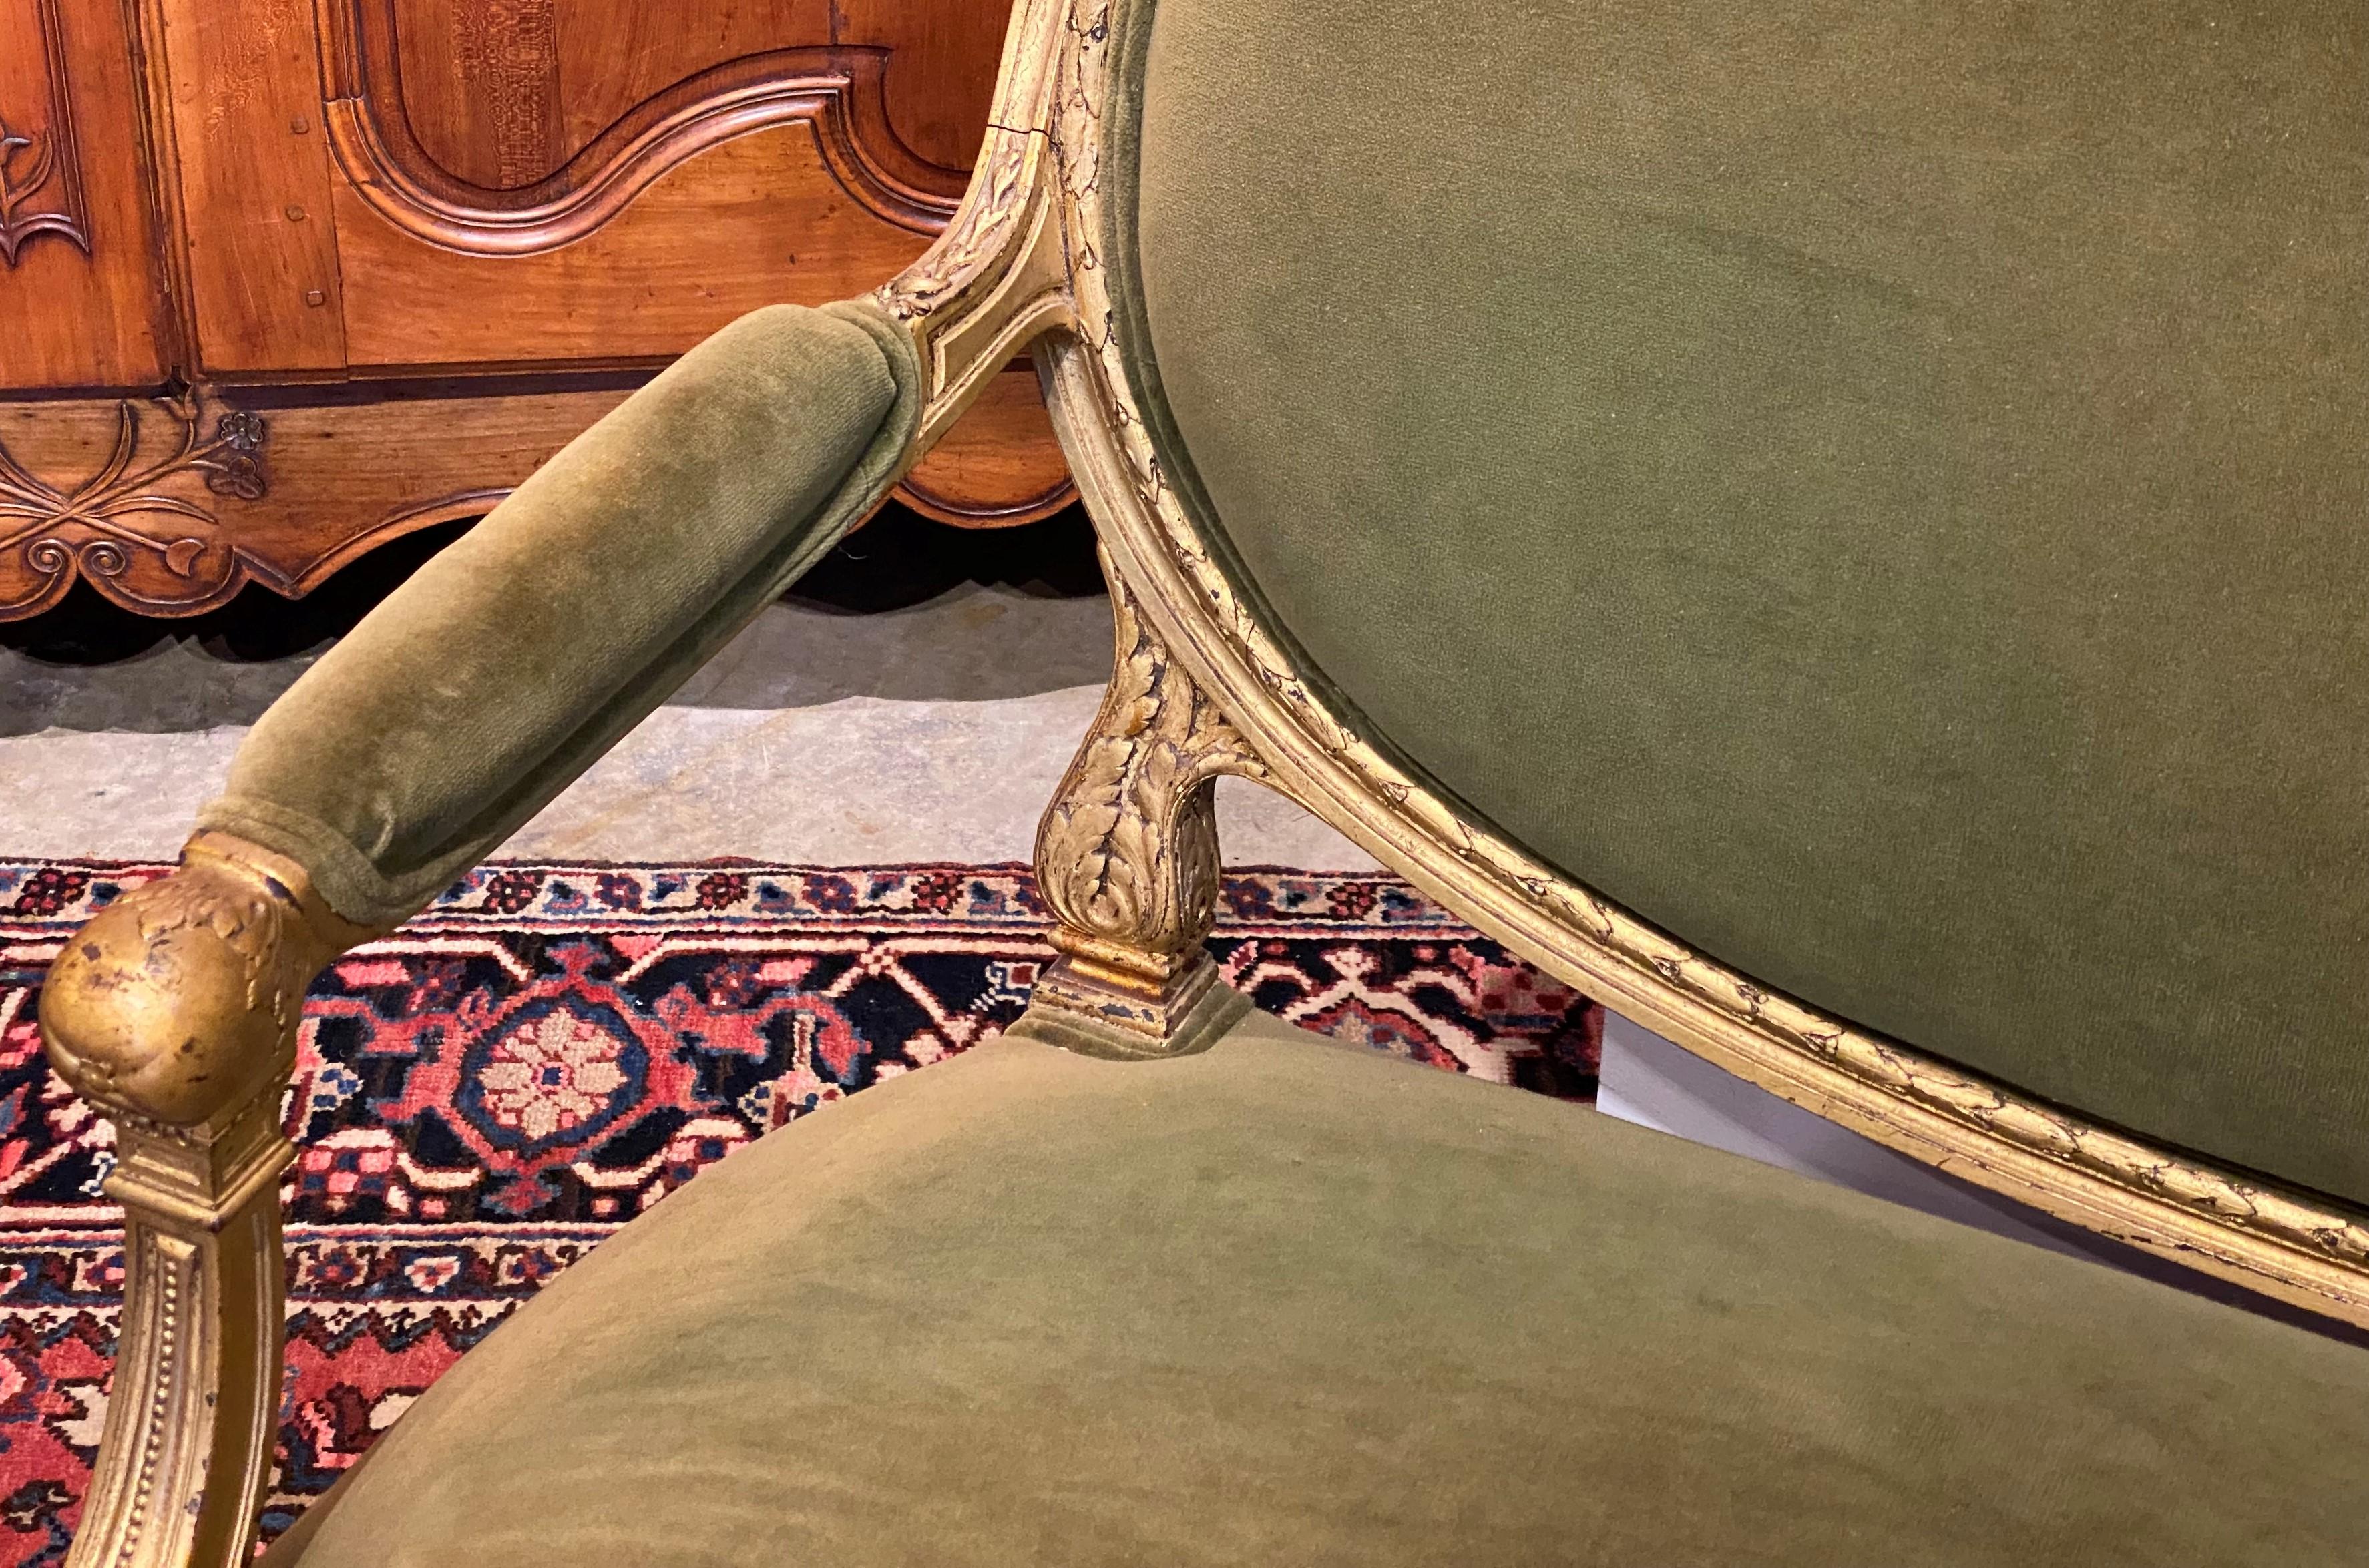 A fine antique French Louis XVI style giltwood sofa or settee with oval upholstered back with small carved shell or fan center crest, padded arms, and a foliate decorated giltwood frame with olive green velvet upholstery, all supported by four 